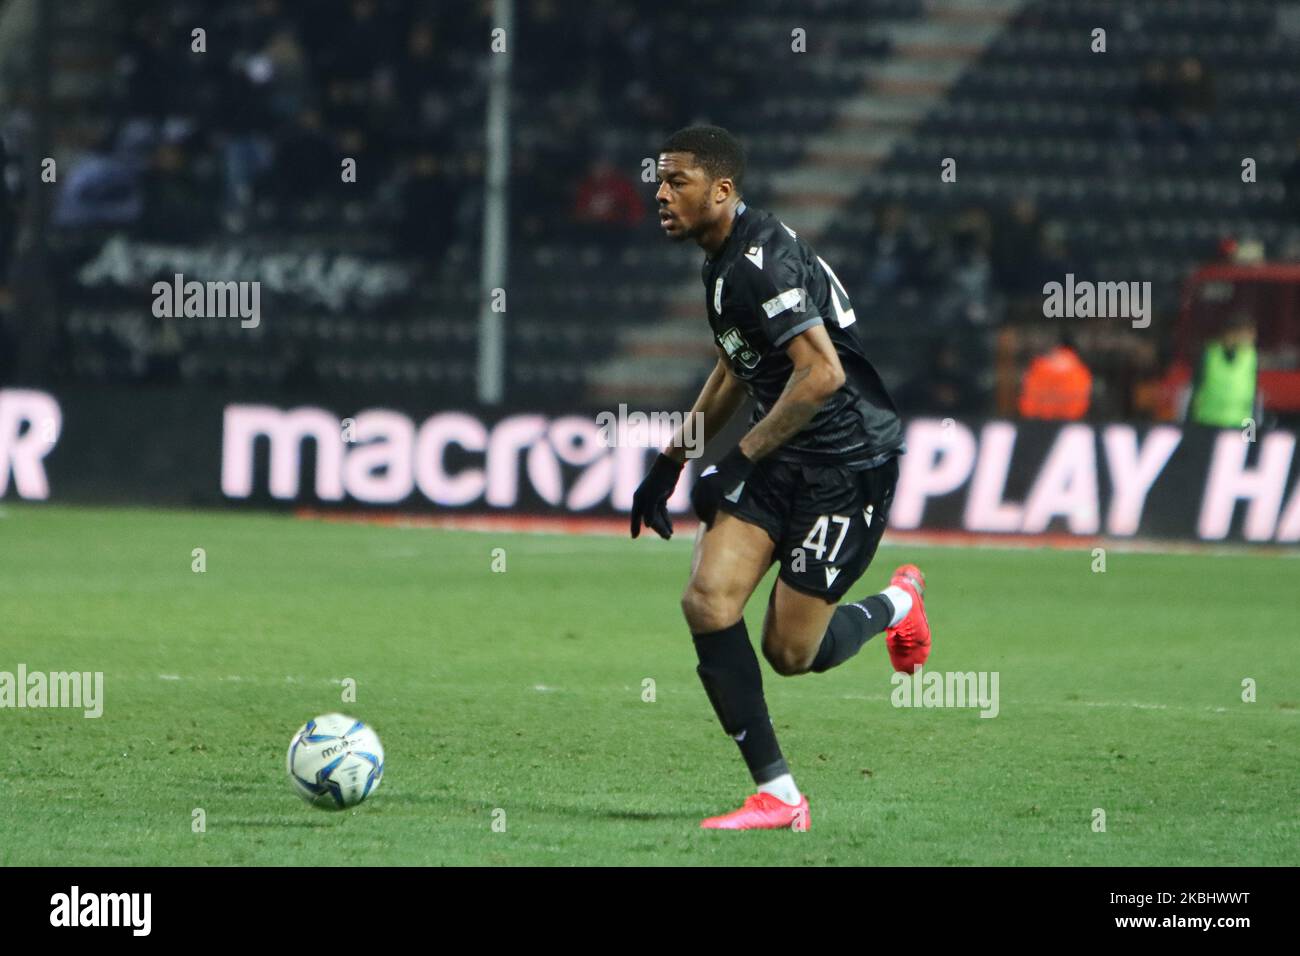 Chuba Amechi Akpom #47 striker of PAOK FC during PAOK Thessaloniki v OFI Crete FC with final score 4-0 for Super League 1 Greece at Toumba Stadium home of PAOK in Thessaloniki. Akpom scored the first and second (penalty) of PAOK. Chuba Akpom is an English professional footballer striker player with previous career in Arsenal and as a loan to Brentford, Coventry City, Nottingham Forest, Hull City, Brighton, Hove Albion and Sint-Truiden. He had also participations in the young national teams of England U16, U17, U18, U19, U20, U21. February 9, 2020 (Photo by Nicolas Economou/NurPhoto) Stock Photo